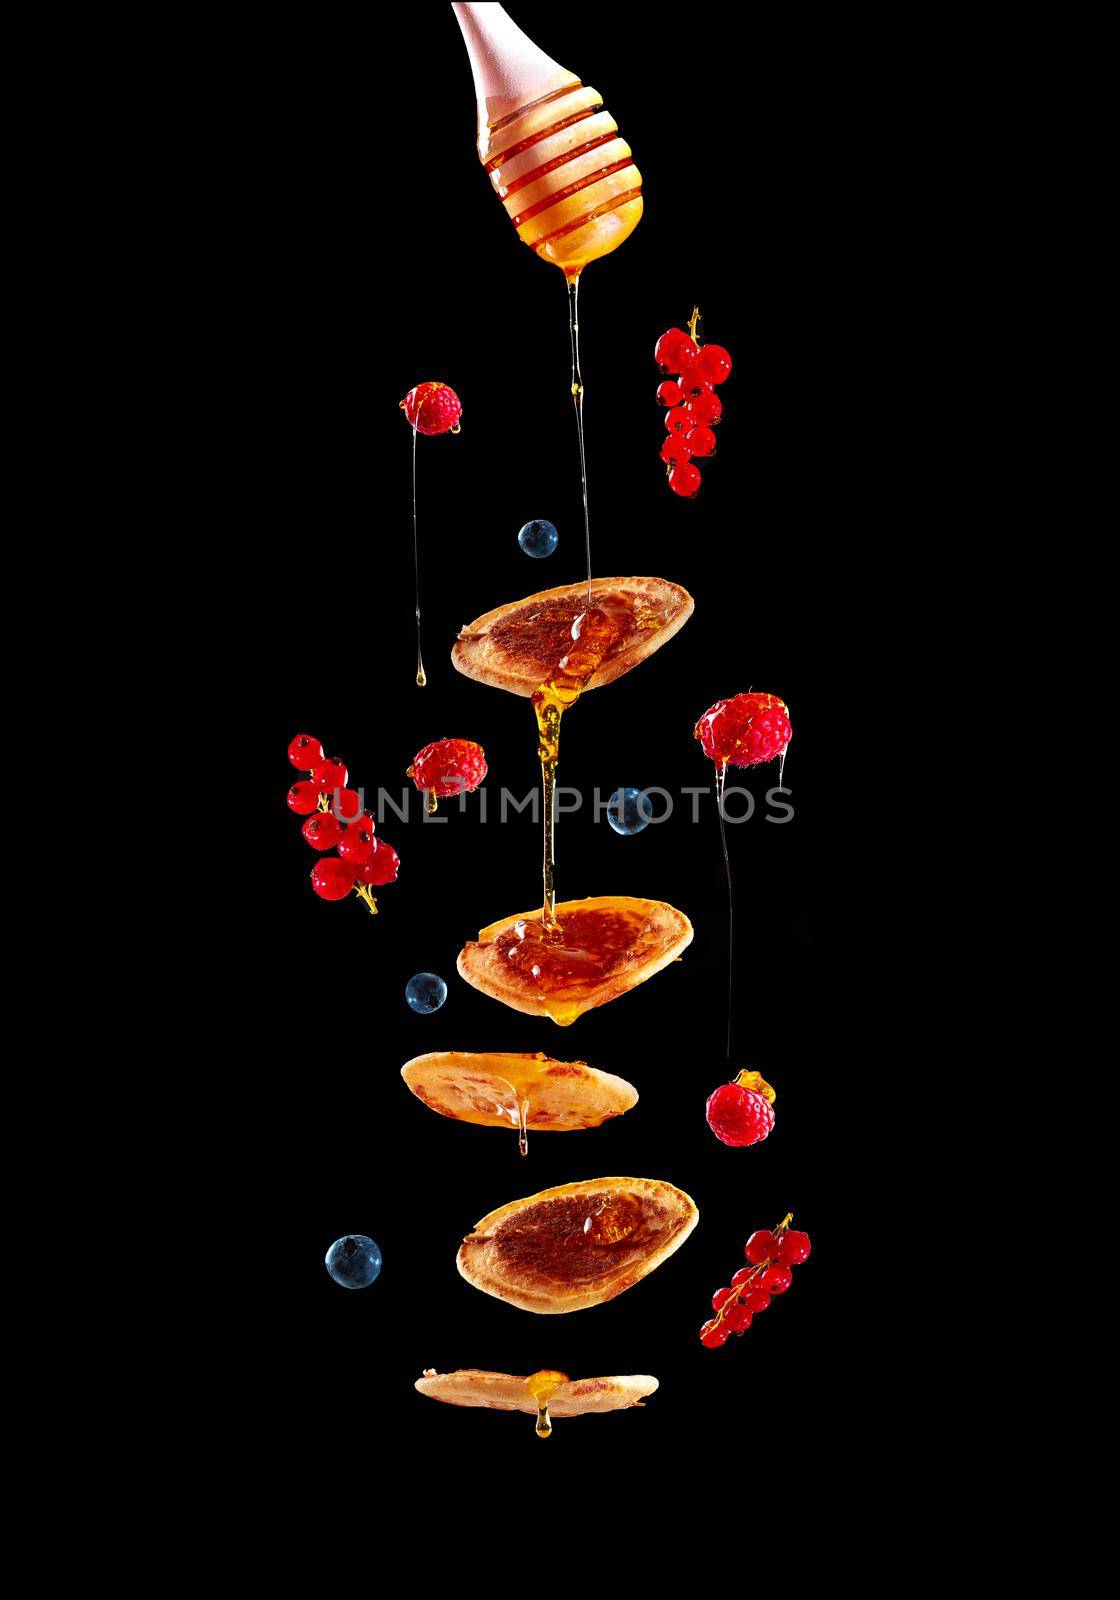 Pancakes with fruit and honey on a black background flying in the air. Mini pancakes with blueberries and raspberries. American breakfast on a dark background. Healthy eating for the whole family. Homemade pancakes with berries. Pancakes with honey. Homemade pancakes on a white background. European breakfast pancakes and berries